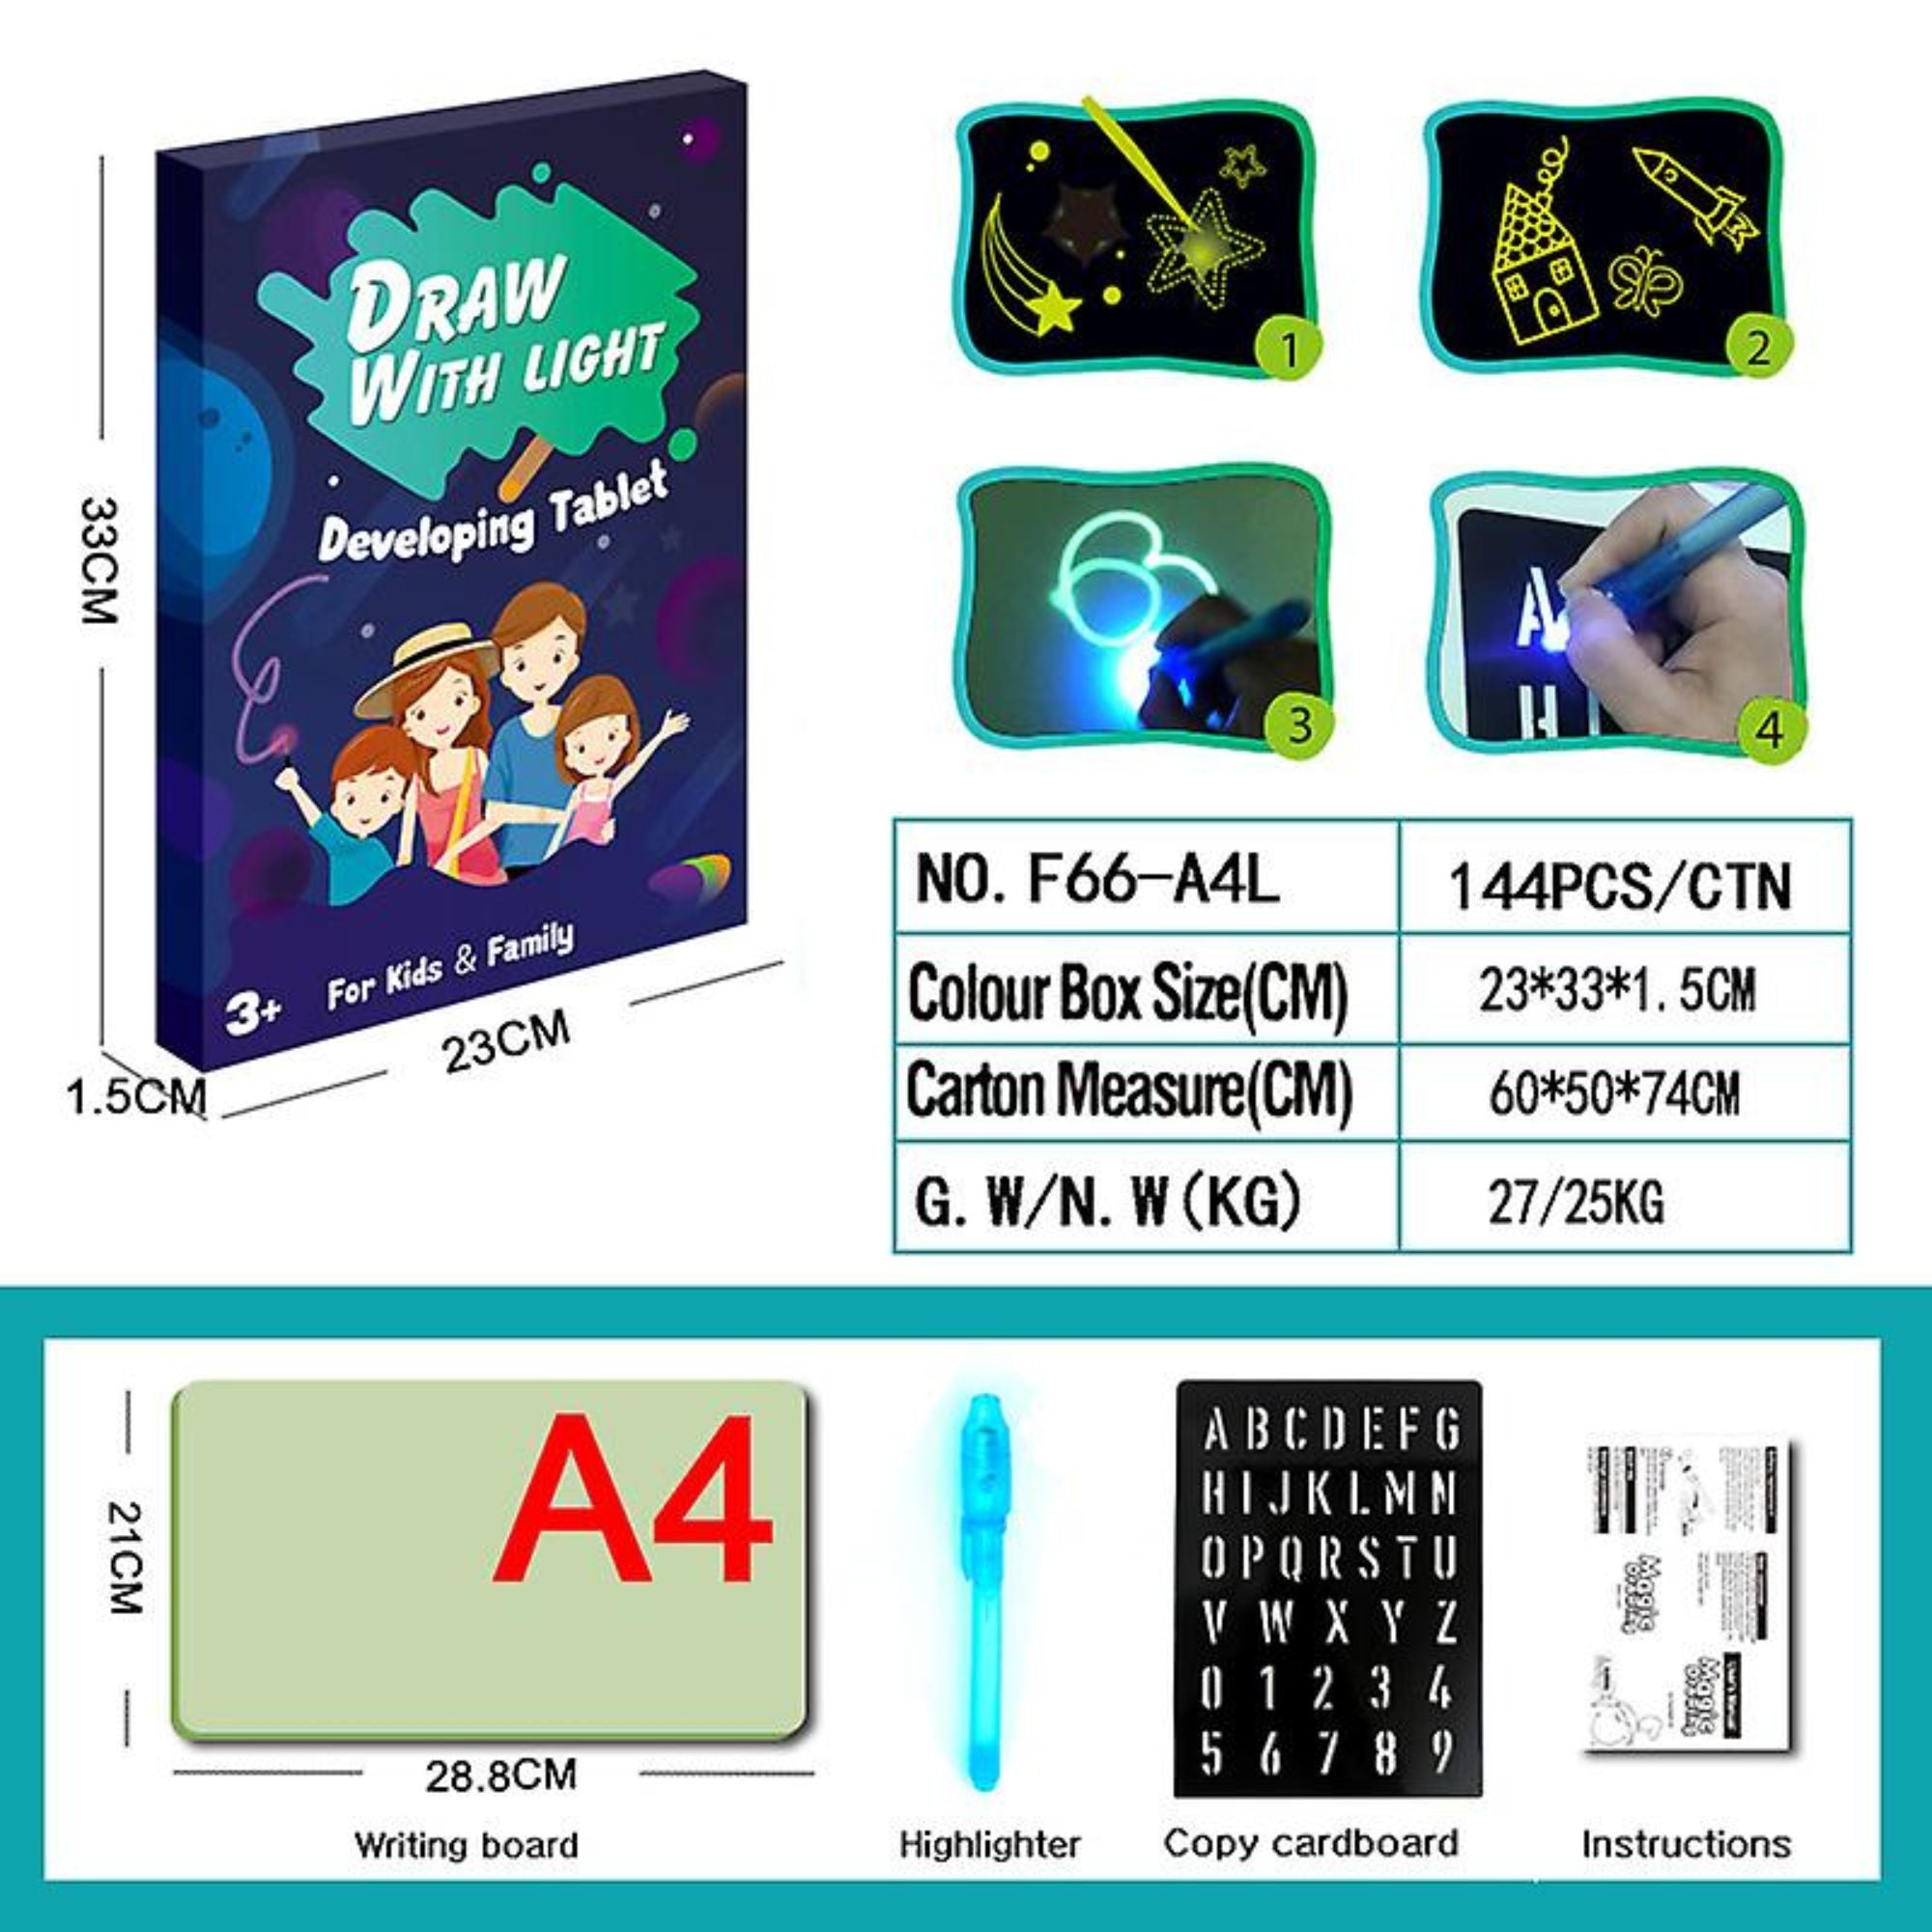 Magic Light Drawing Pad Light Up Drawing Fun Developing Toy Draw Sketchpad Board Portable